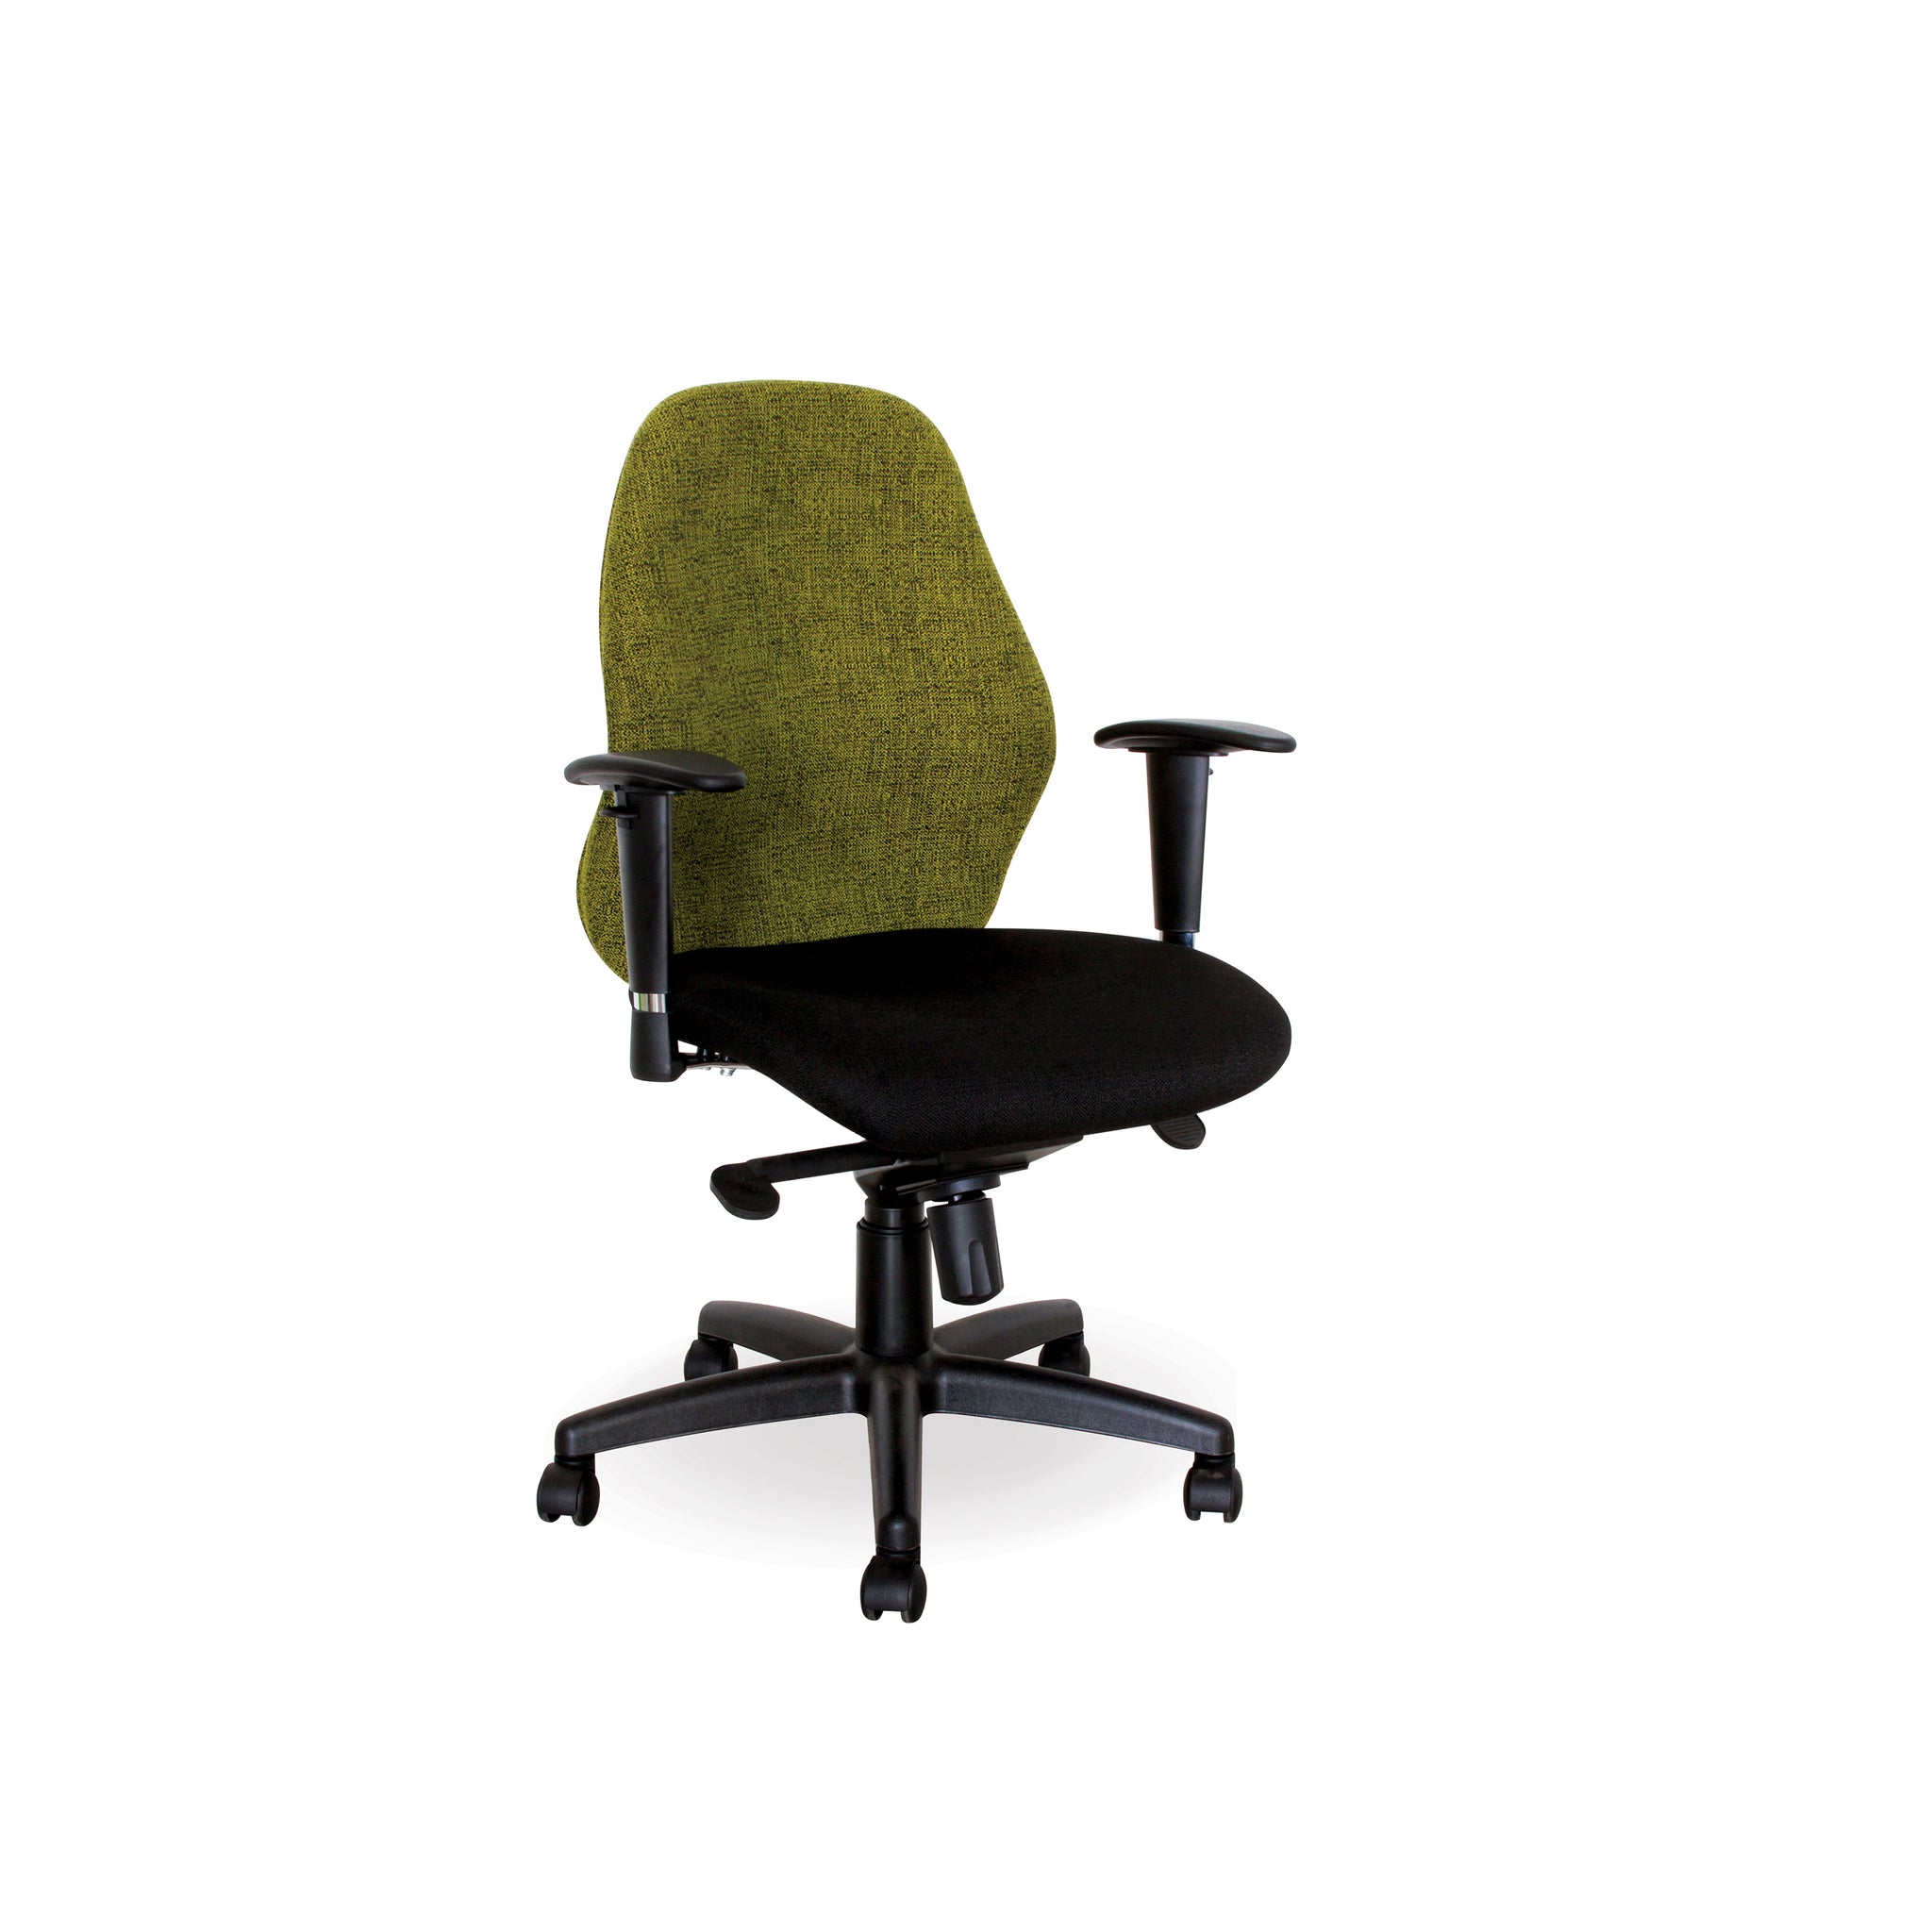 Hedcor Lucea mid back office chair